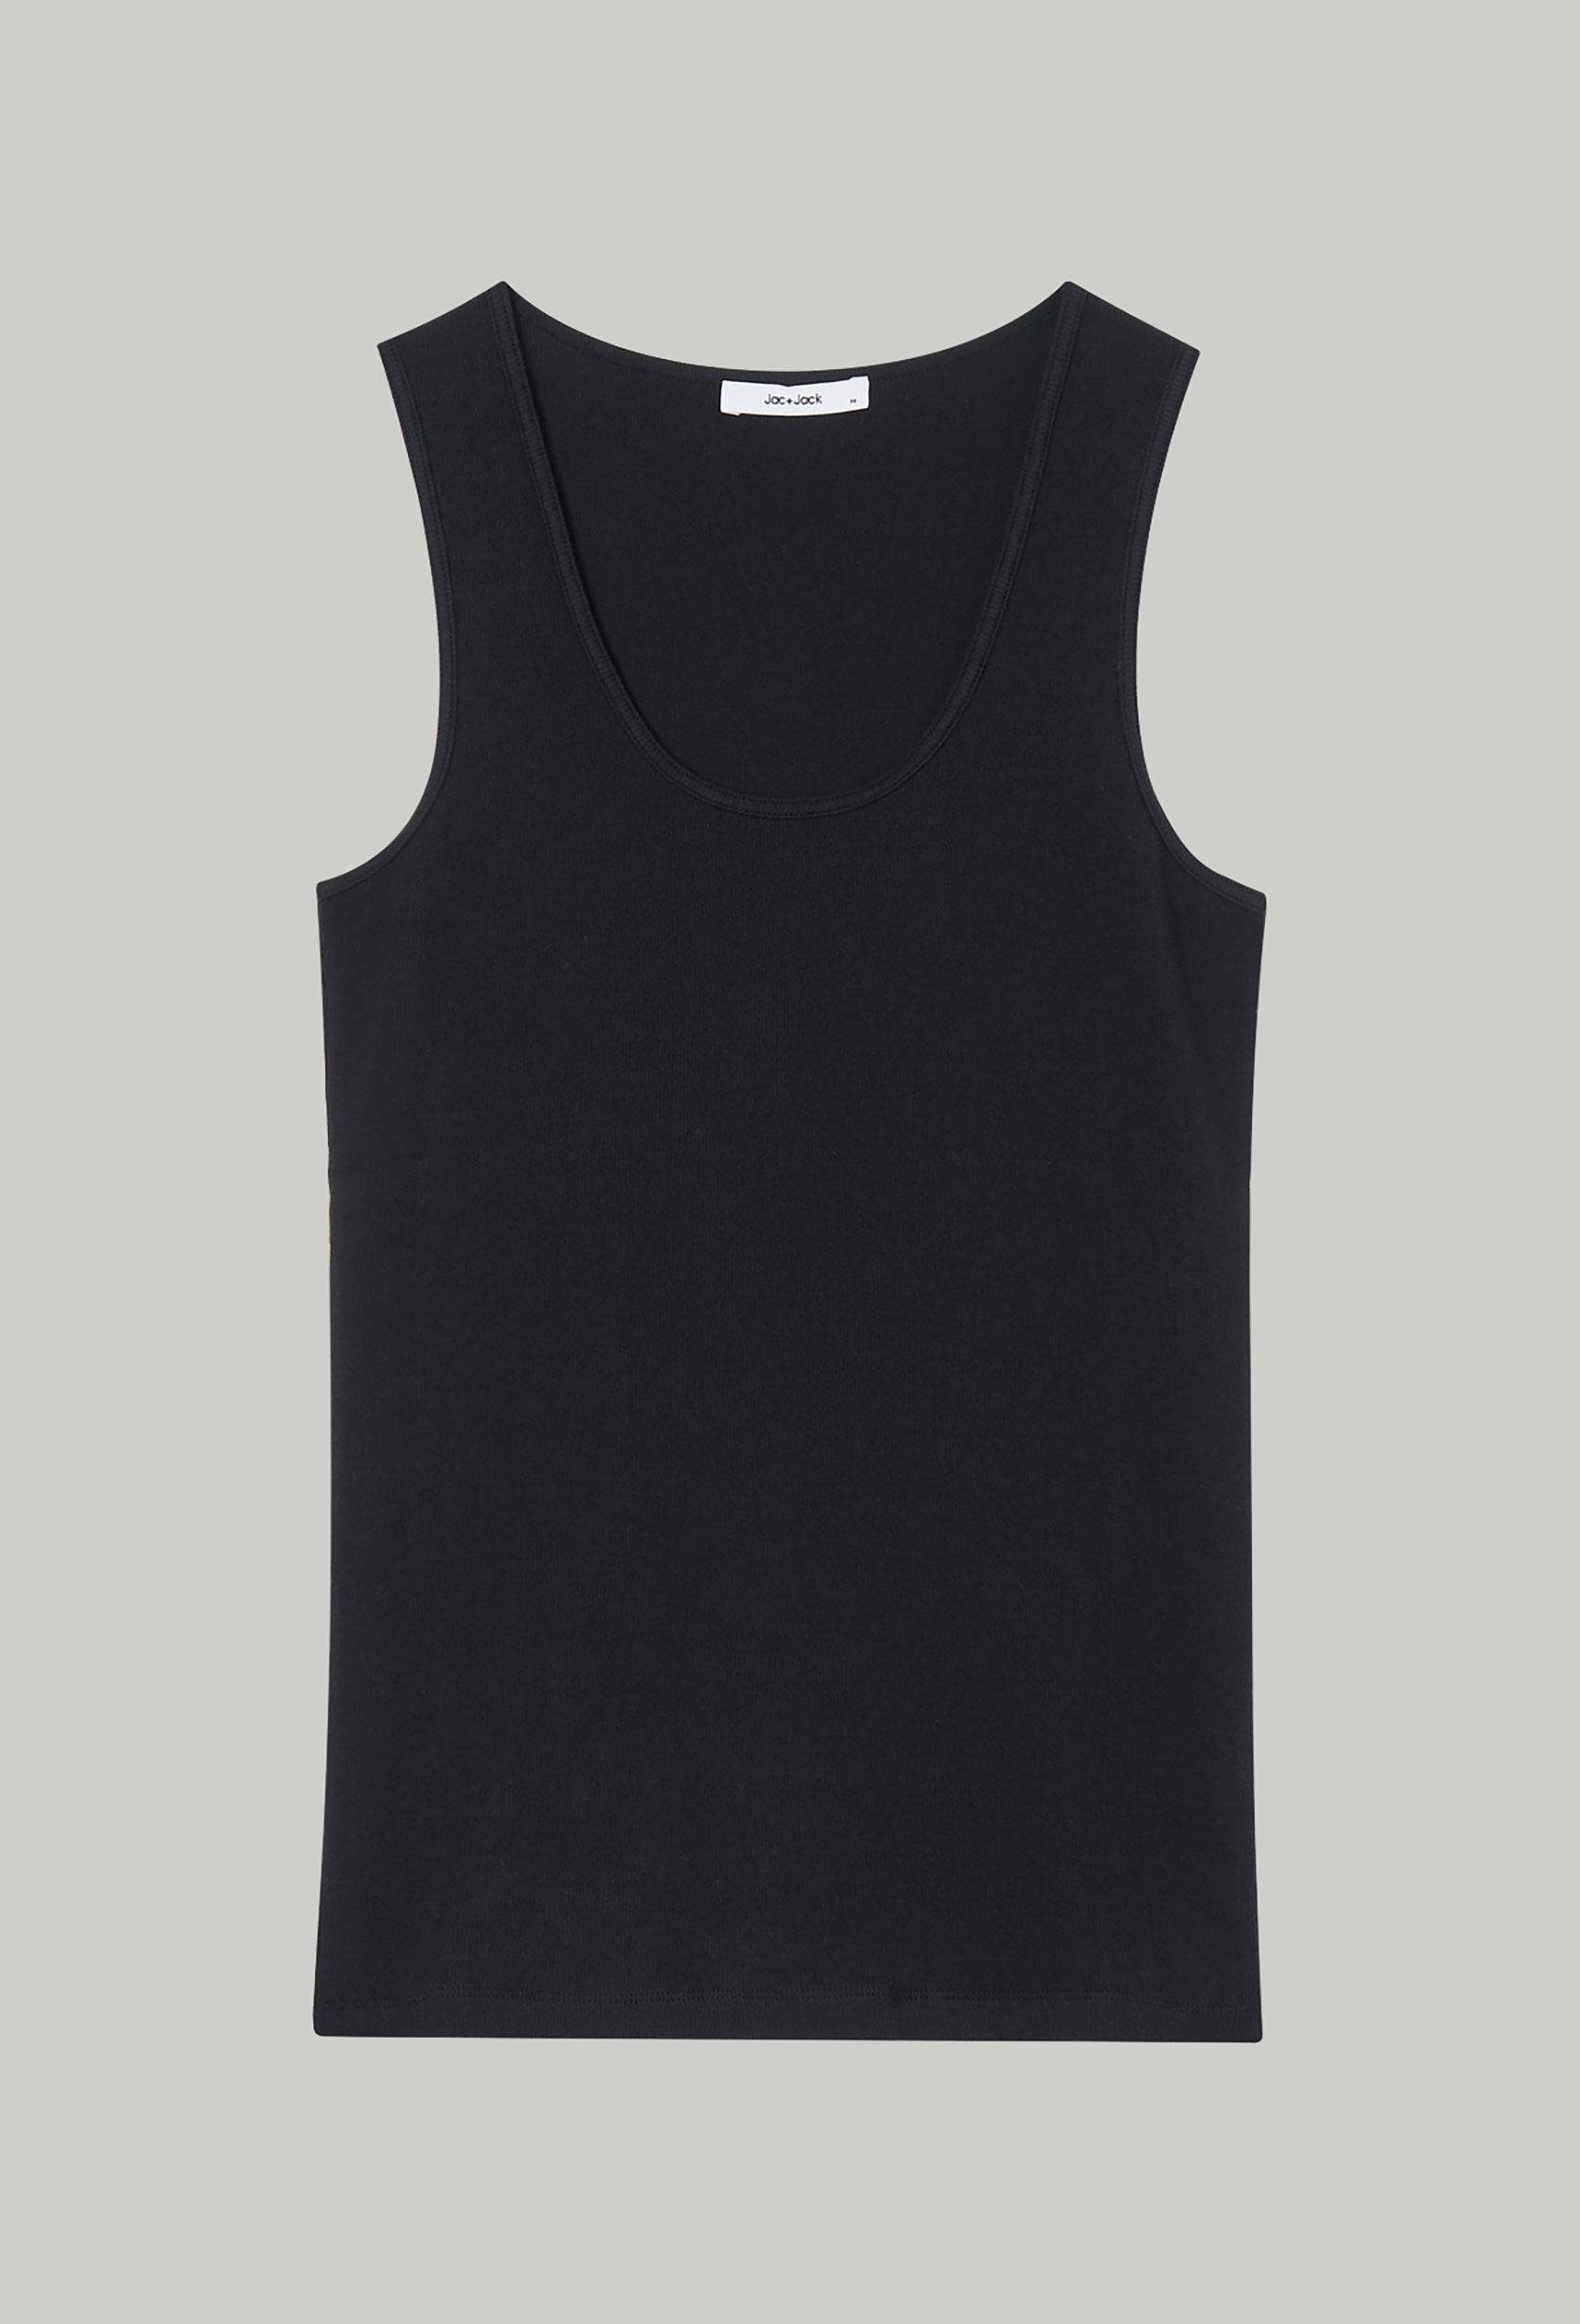 Jac+Jack SONG COTTON TANK in Black